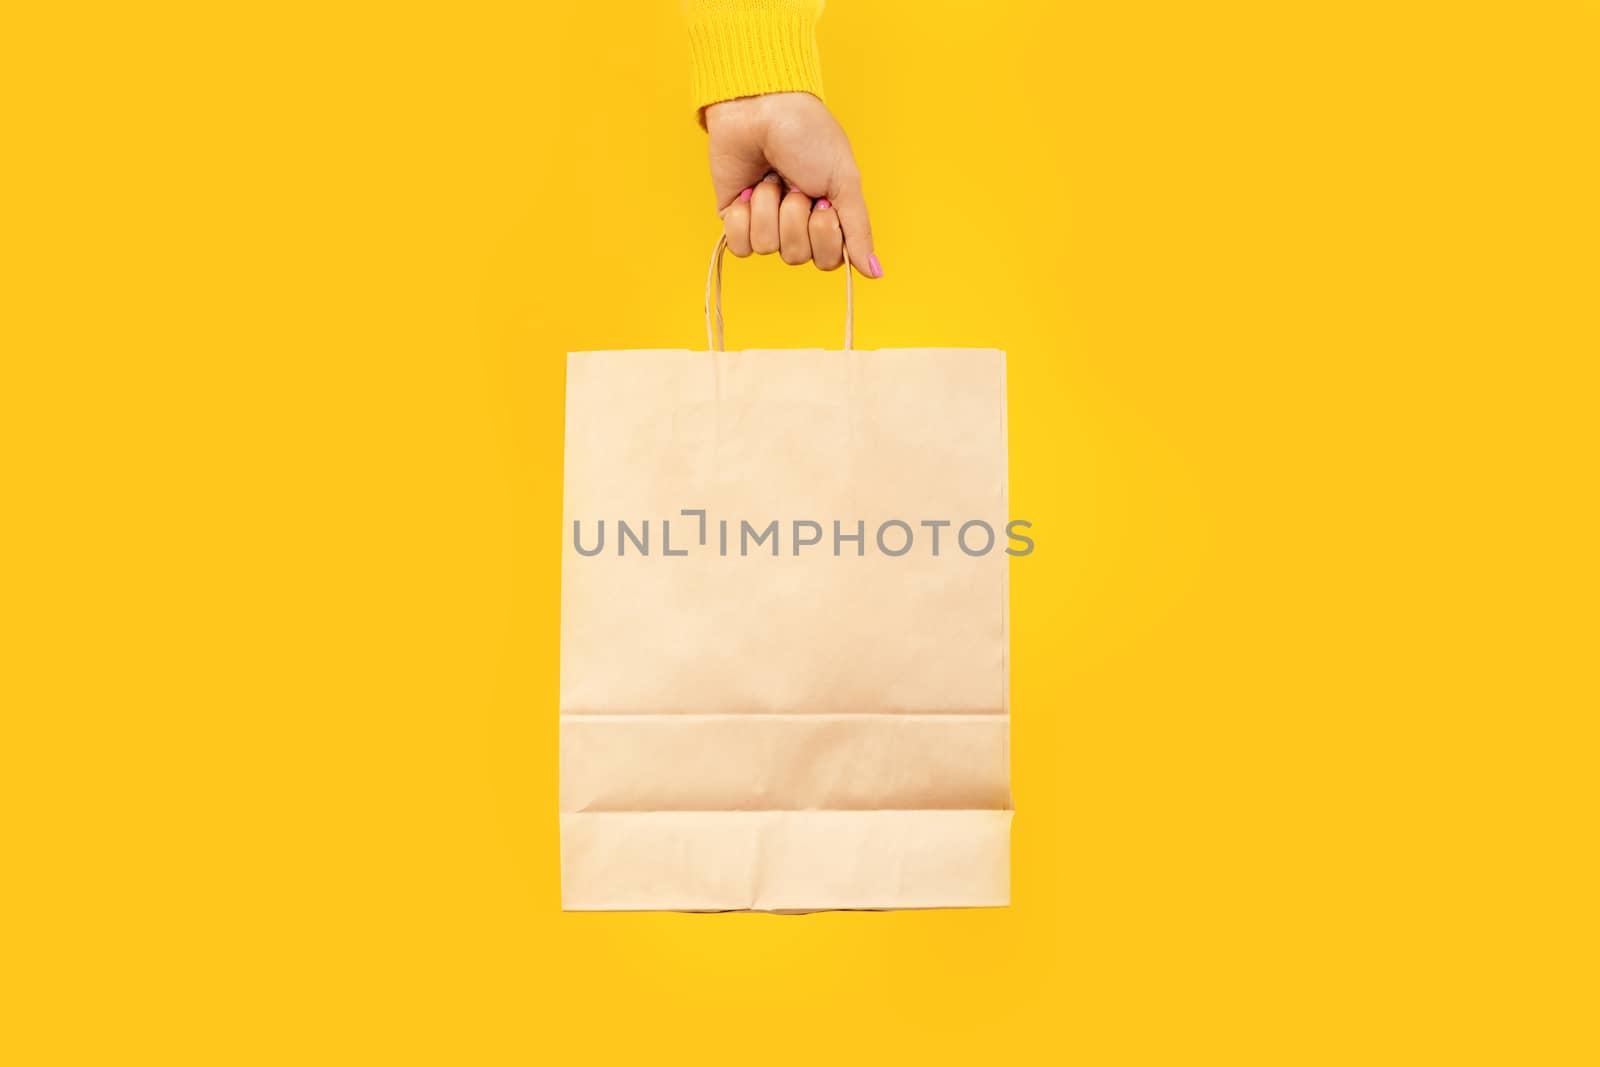 Woman hand holding paper shopping bag on yellow background. Shopping concept.